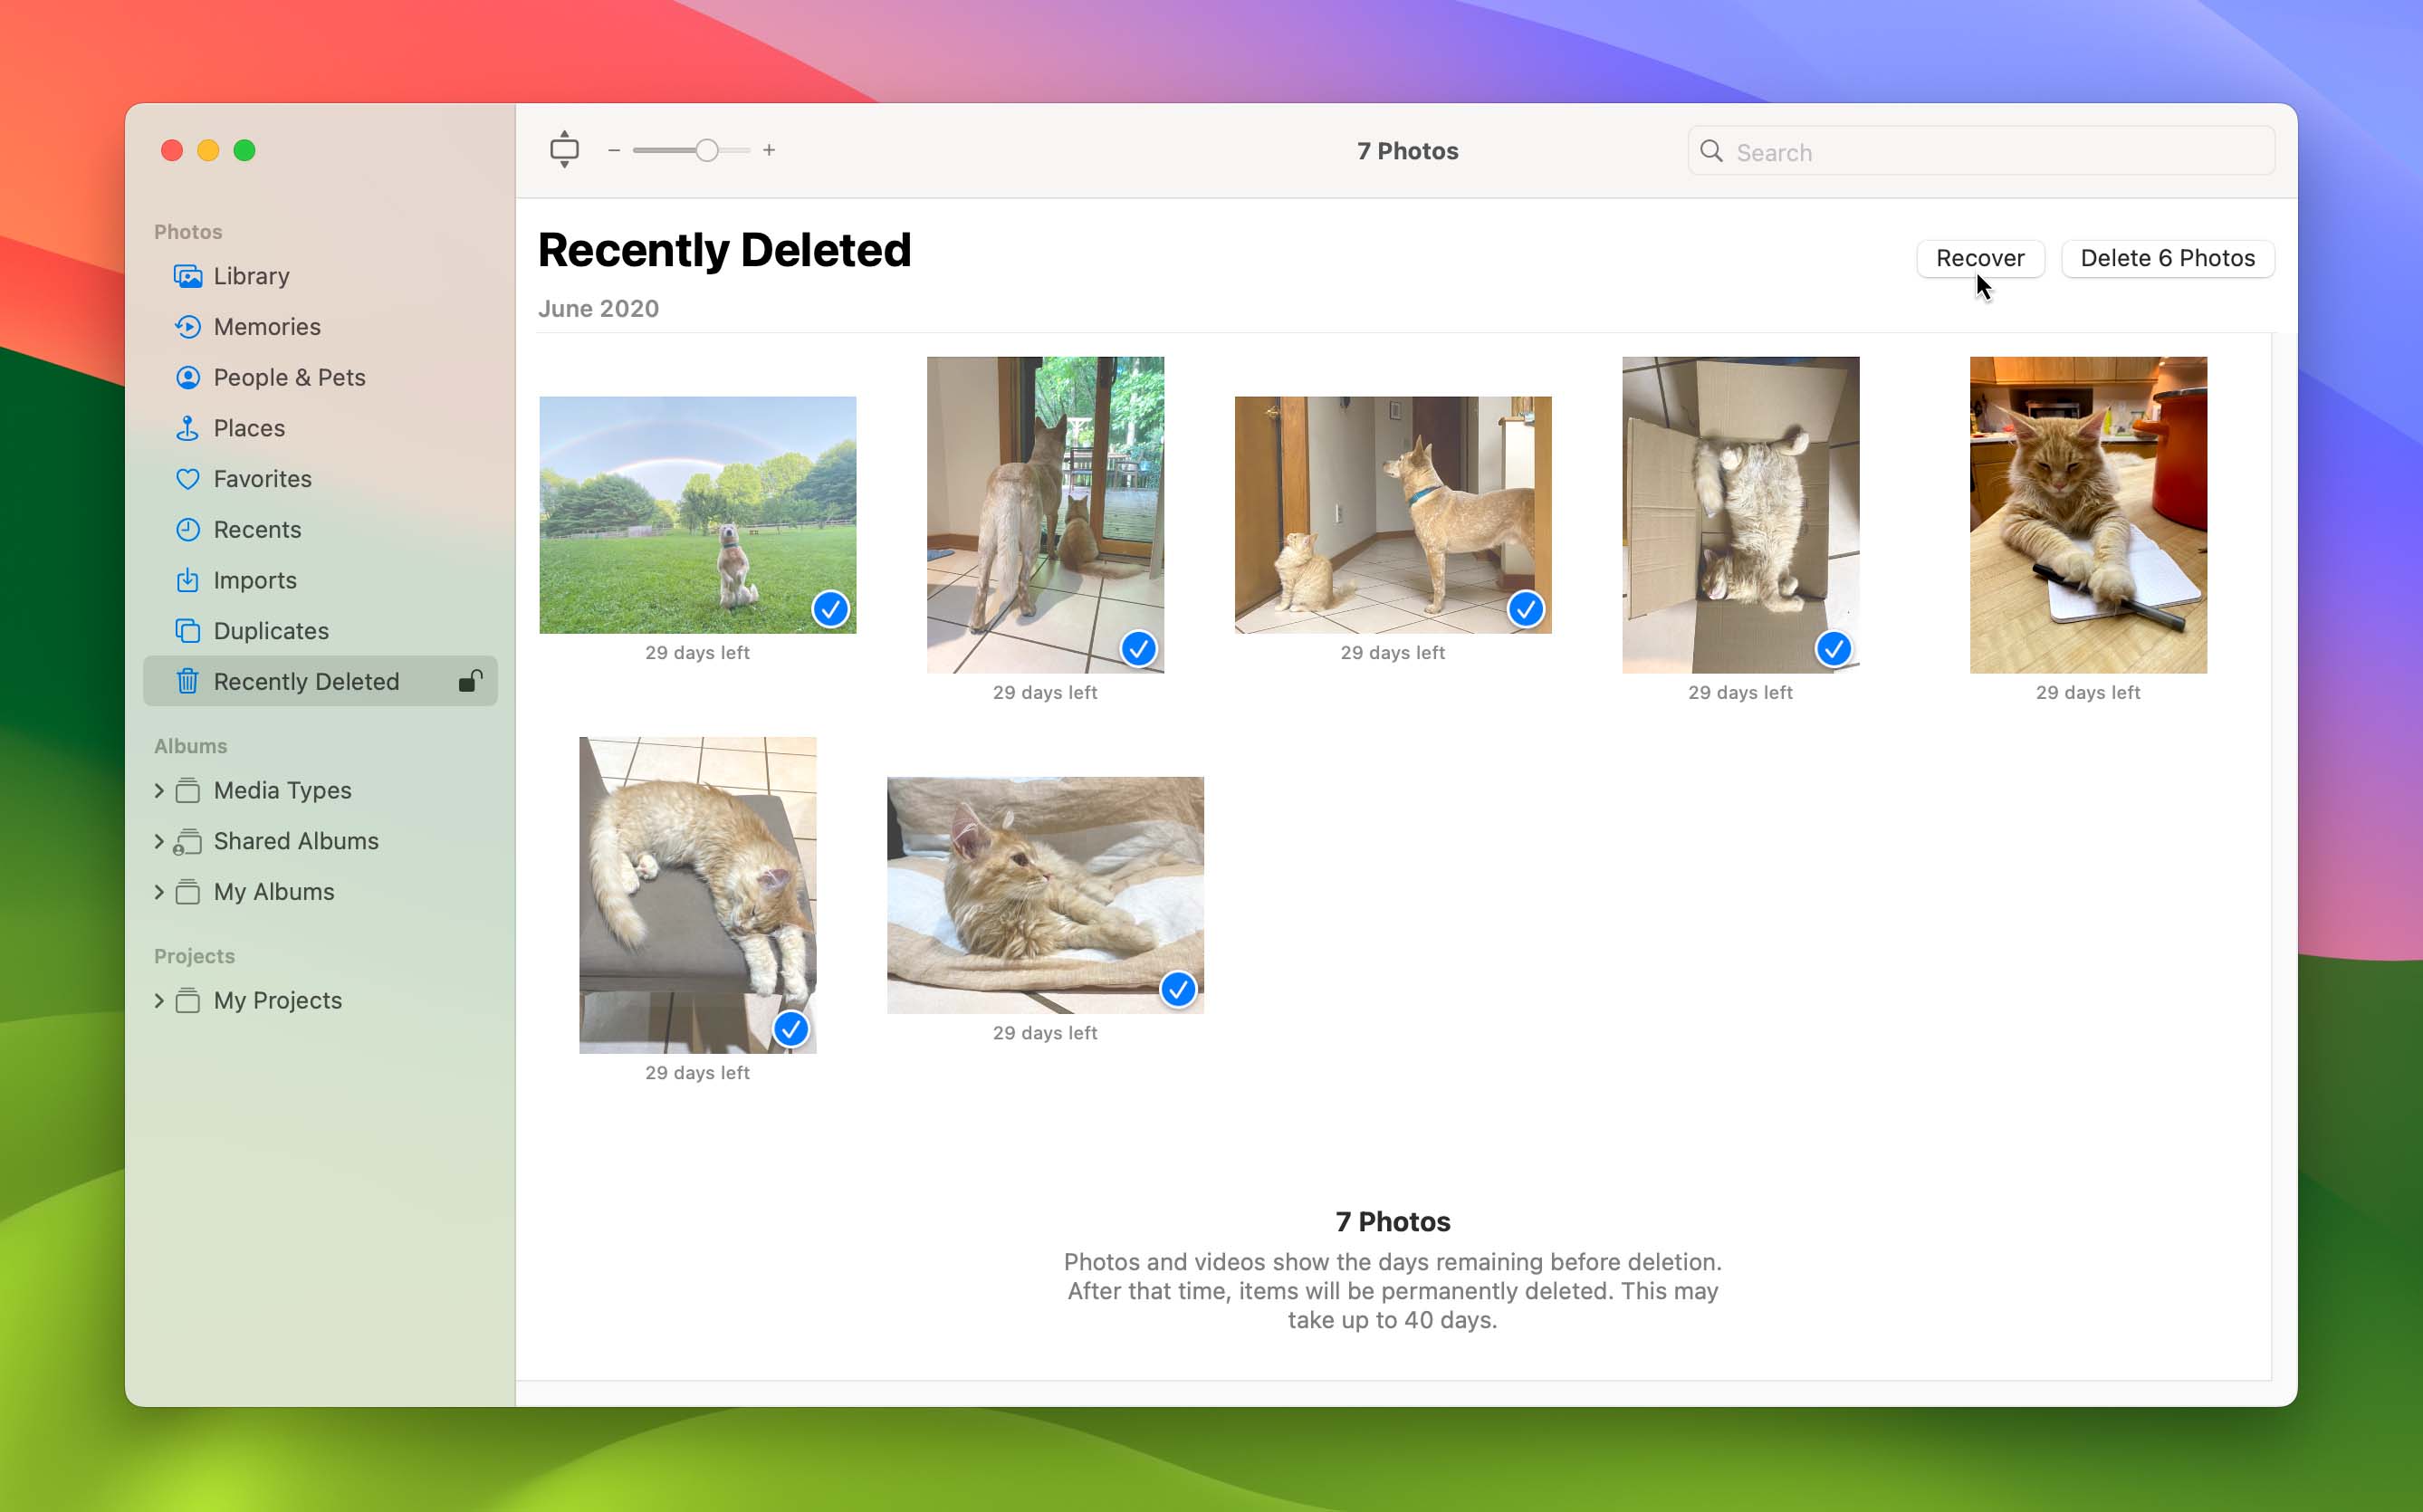 restore photos from recently deleted folder in Photo app